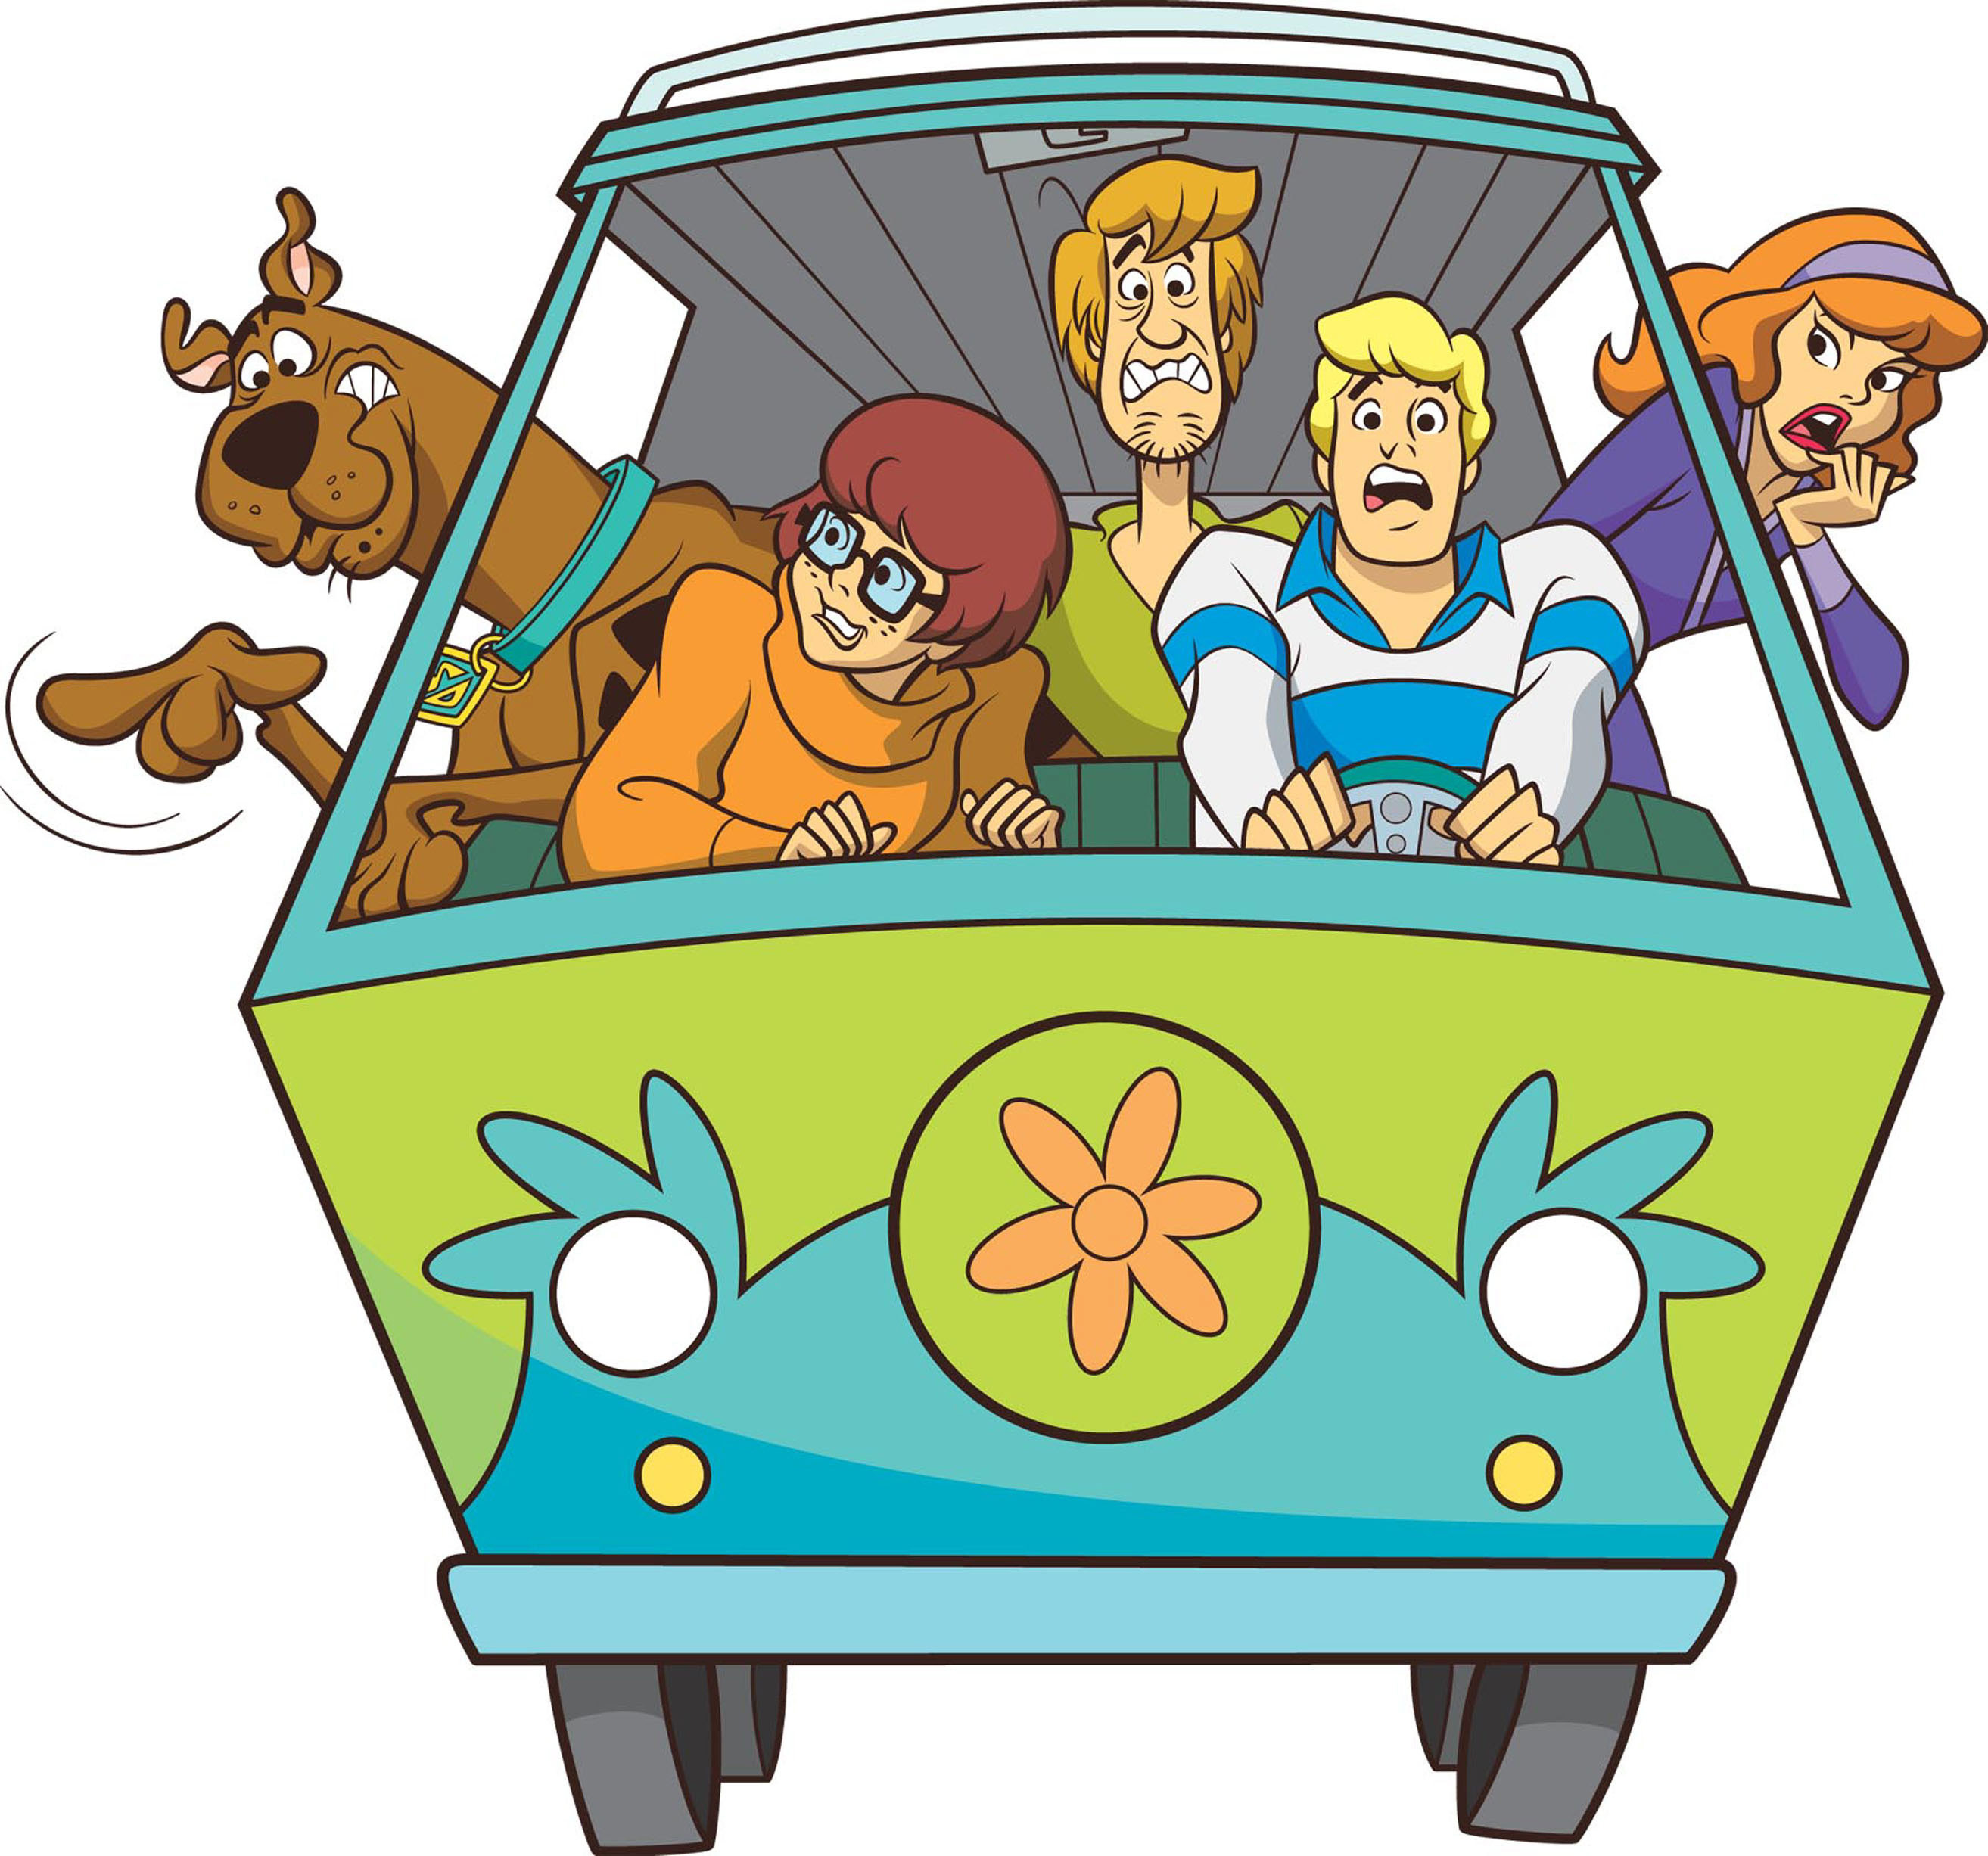 (Clockwise) Scooby-Doo, Shaggy, Daphne, Velma and Fred of Mystery Inc. in their Mystery machine vehicle for a &quot;What&#x27;s New, Scooby-Doo?&quot; promotional photo